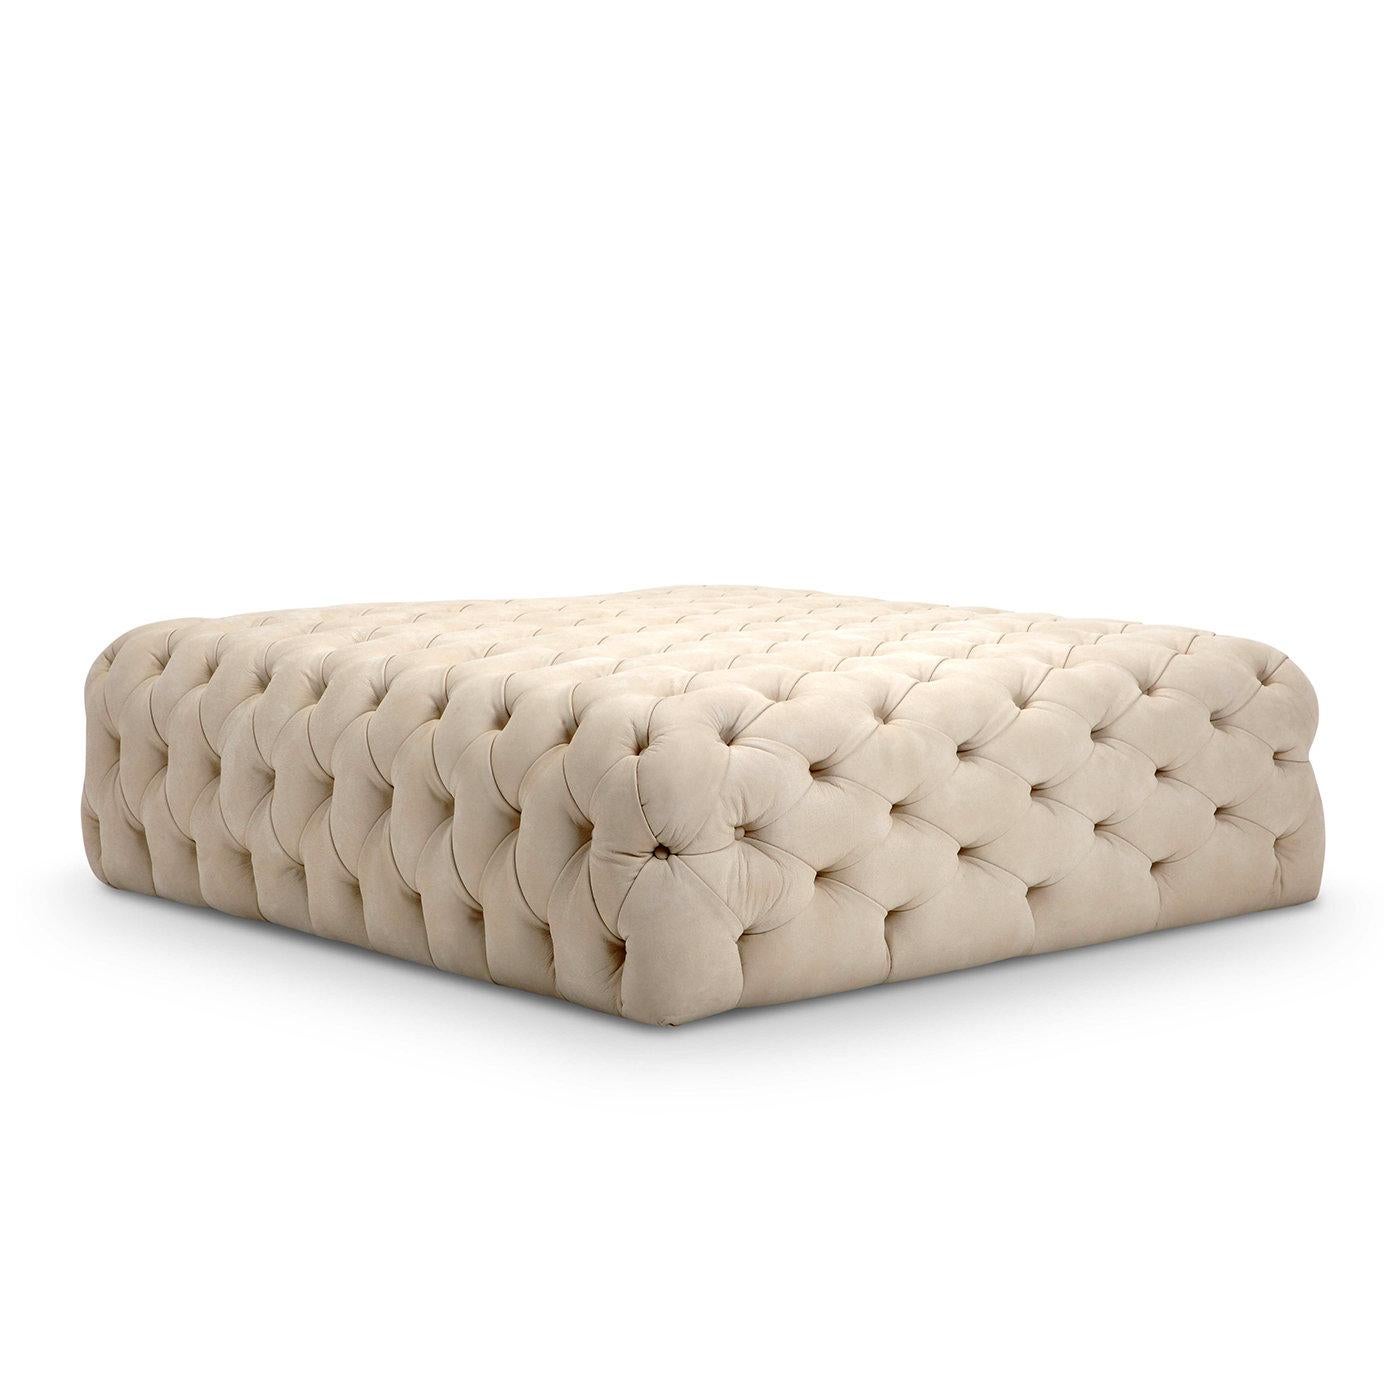 This tufted pouf is entirely padded in multi-density polyurethane foam to give a comfortable feel to its tailored look. The cover is in white Dacron, and the large plywood and fir frame is raised on PVC feet. Available in three sizes (75x75 cm,